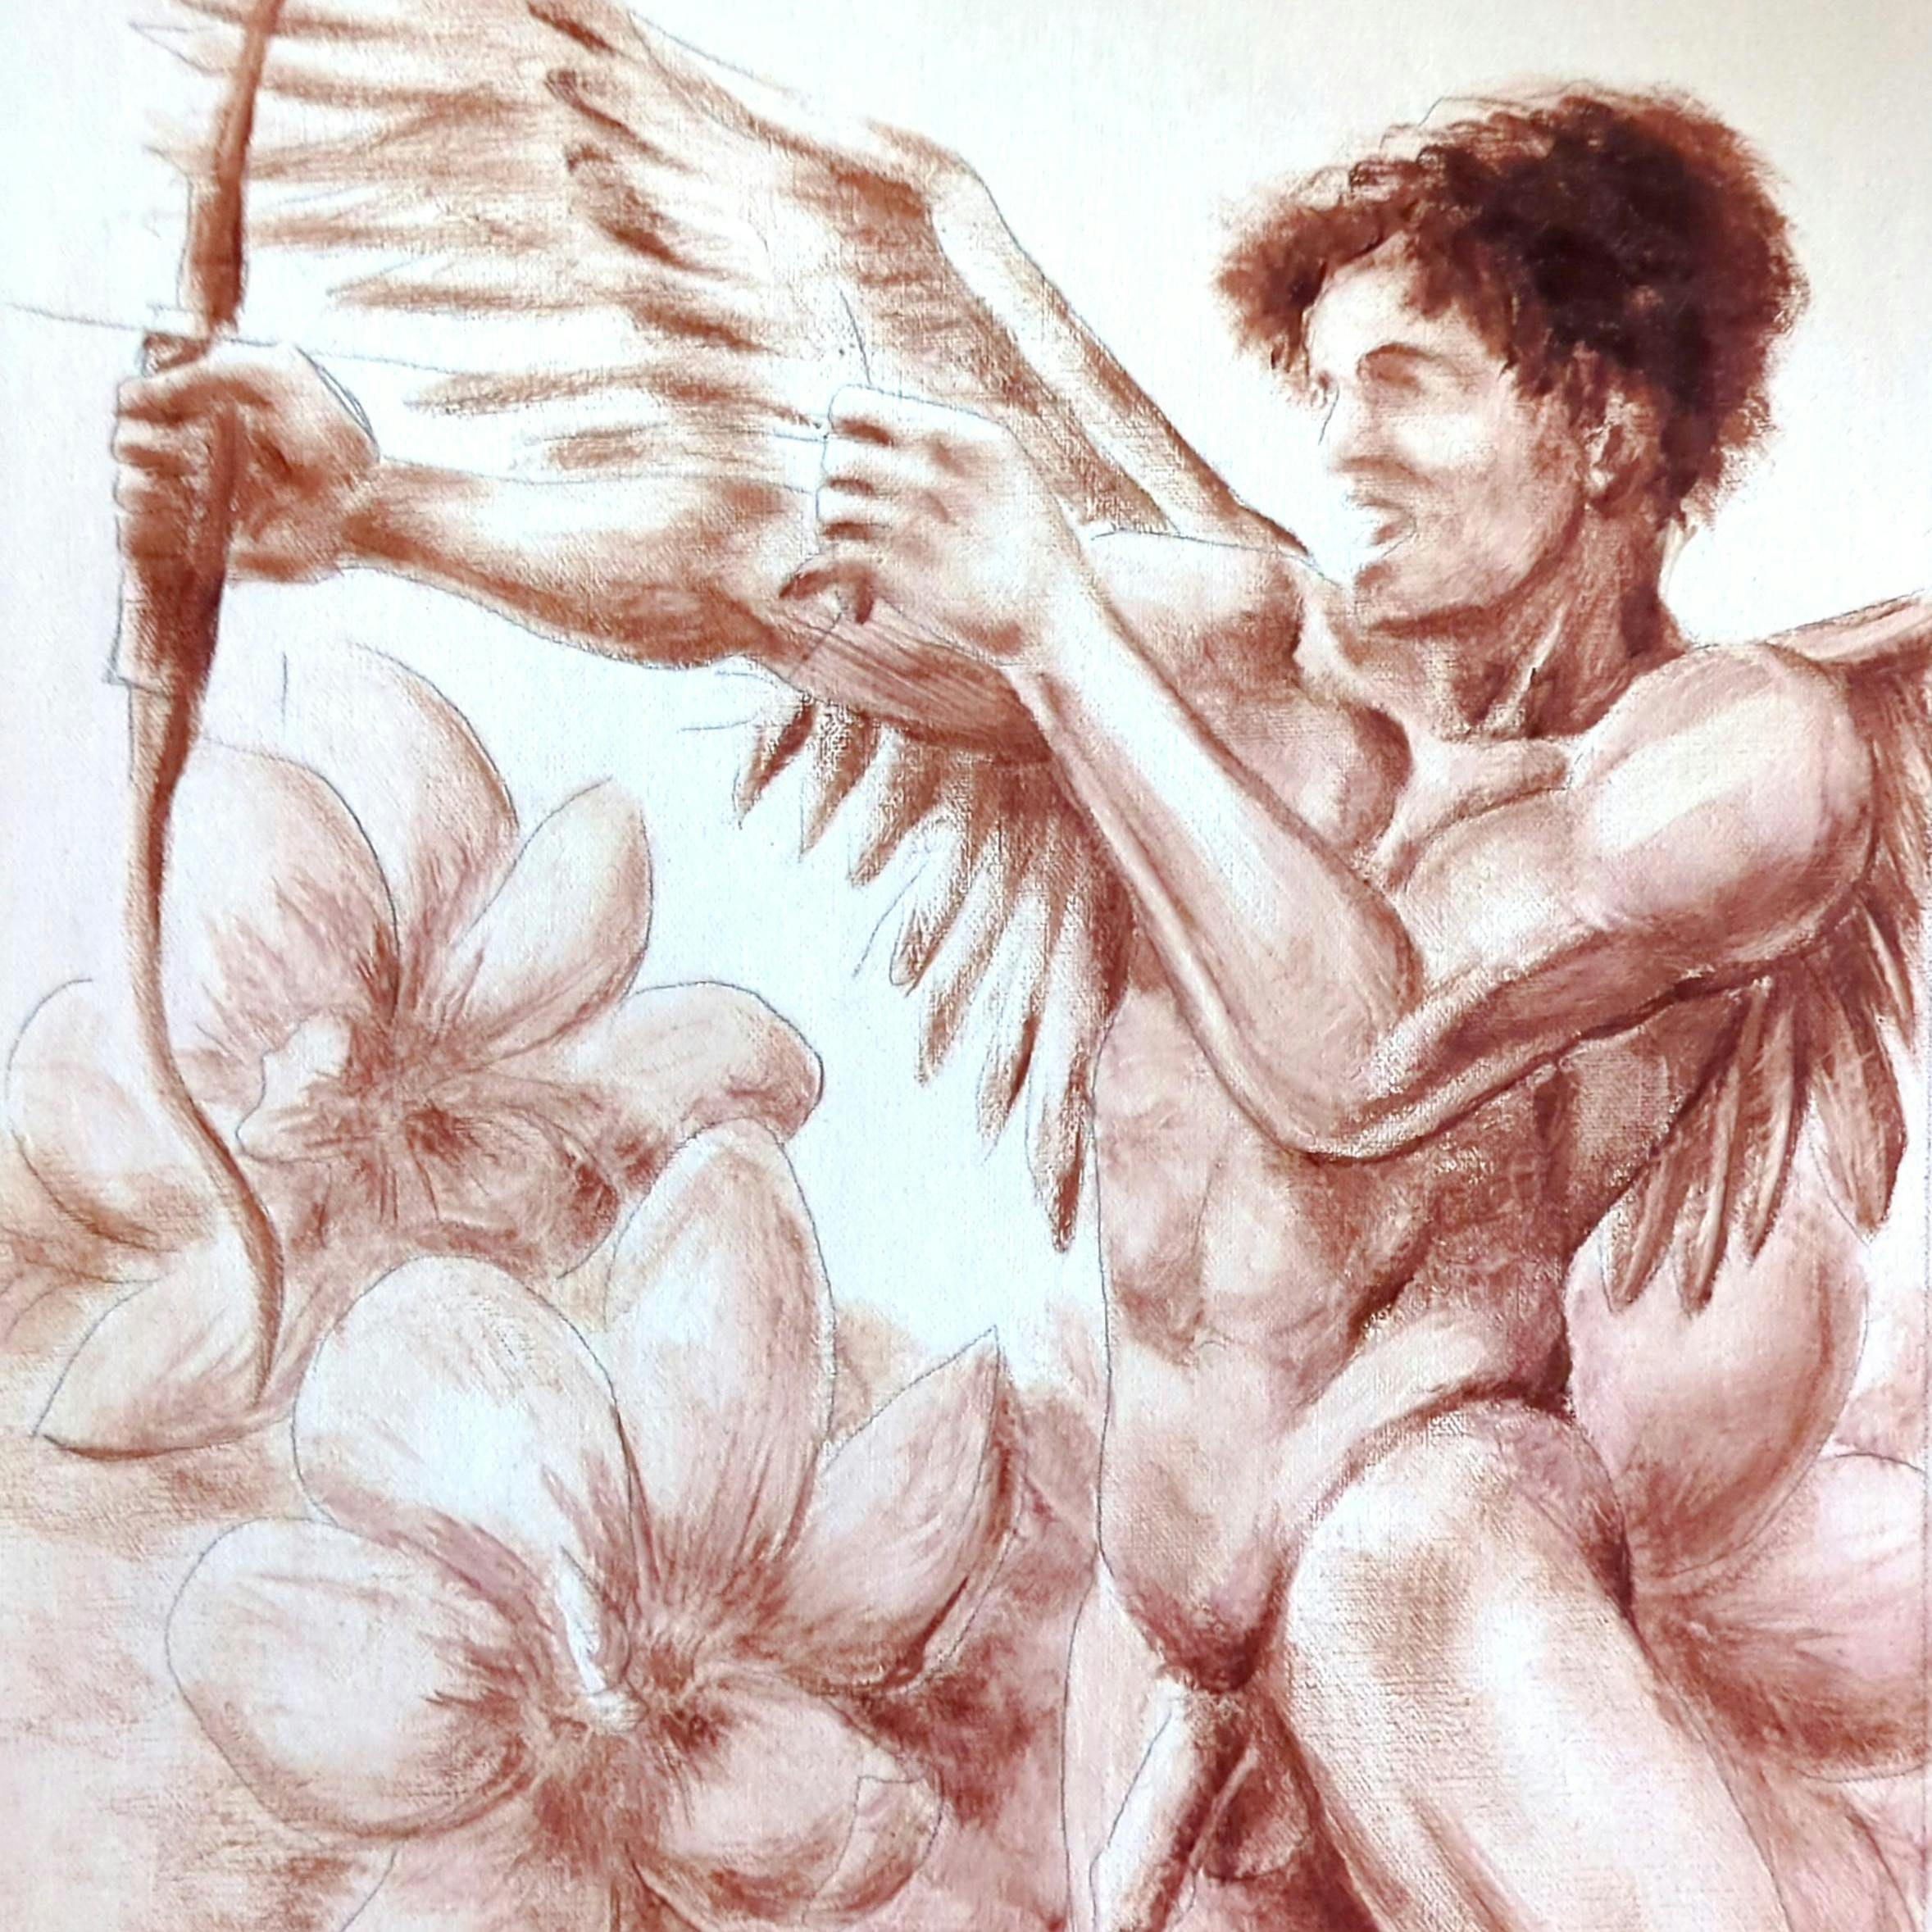 first progress shot of an oil painting, this is the monochrome first layer; the painting depicts a muscular, nude, male angel against a pristine blue sky, graced by large magnolia blossoms. he's grinning impishly and aiming a golden bow and arrow at an unseen target